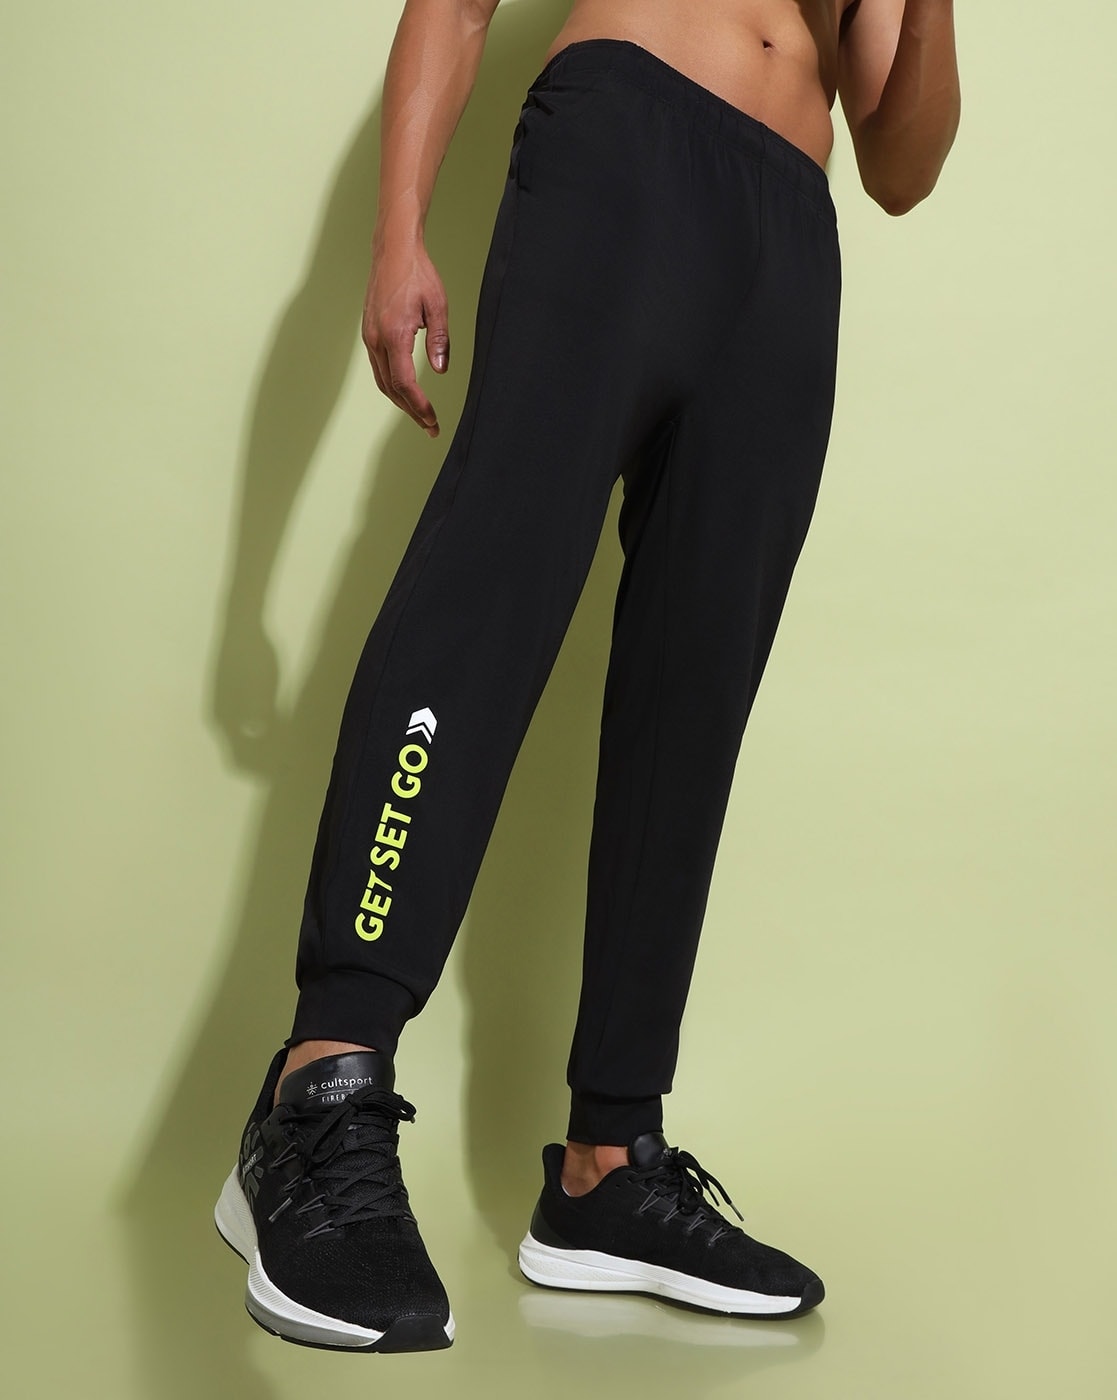 Typo Print Joggers with Insert Pockets